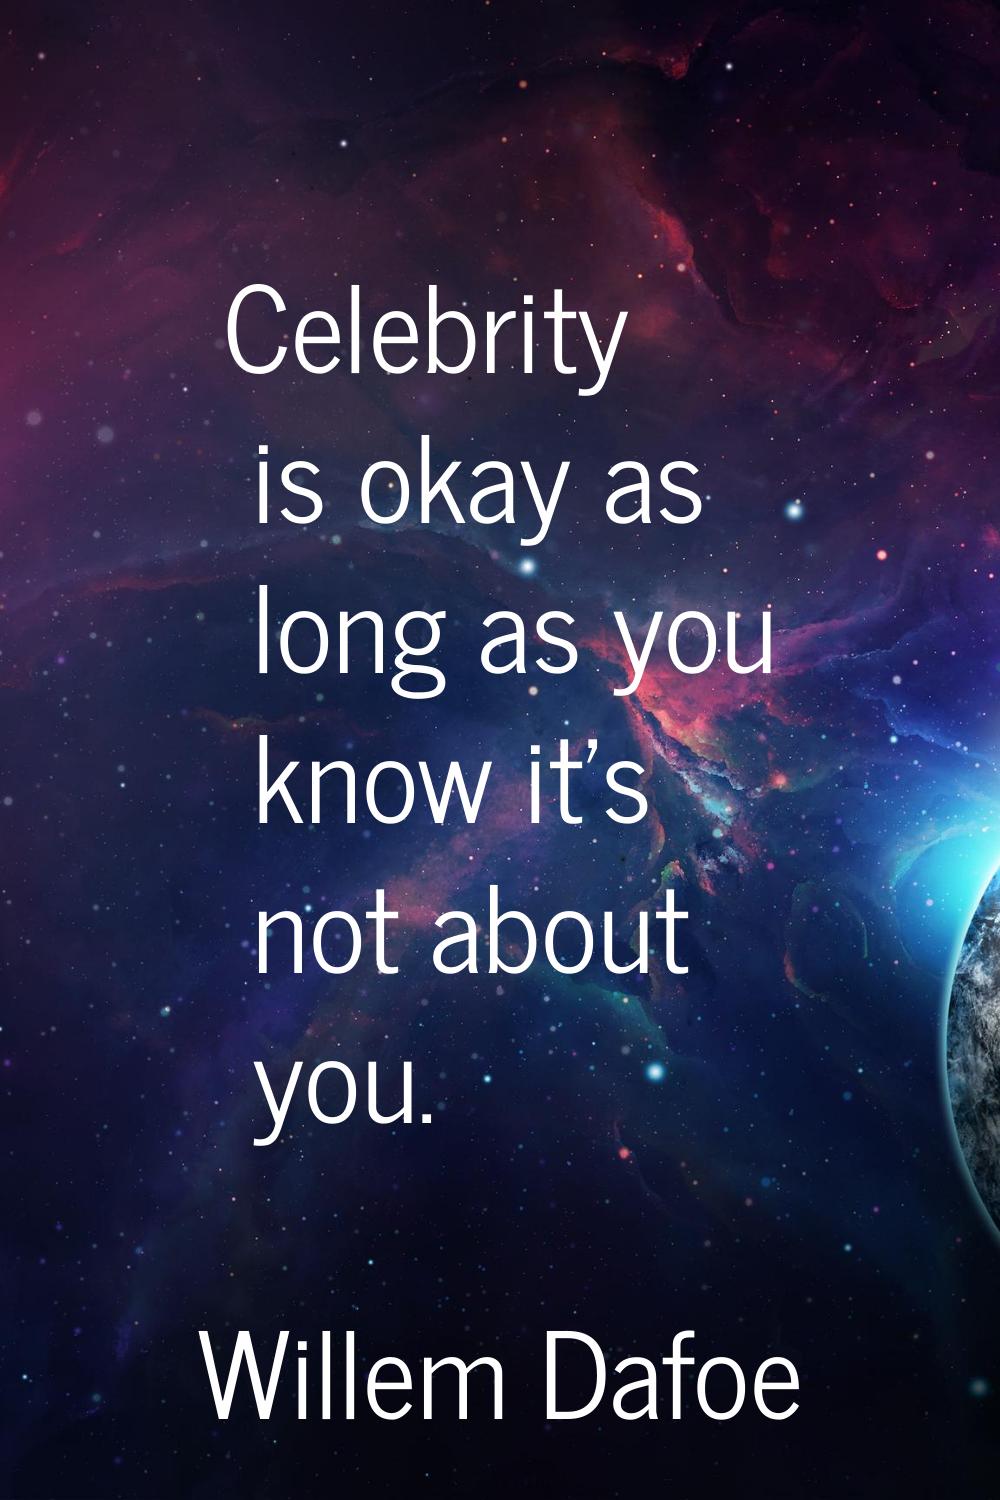 Celebrity is okay as long as you know it's not about you.